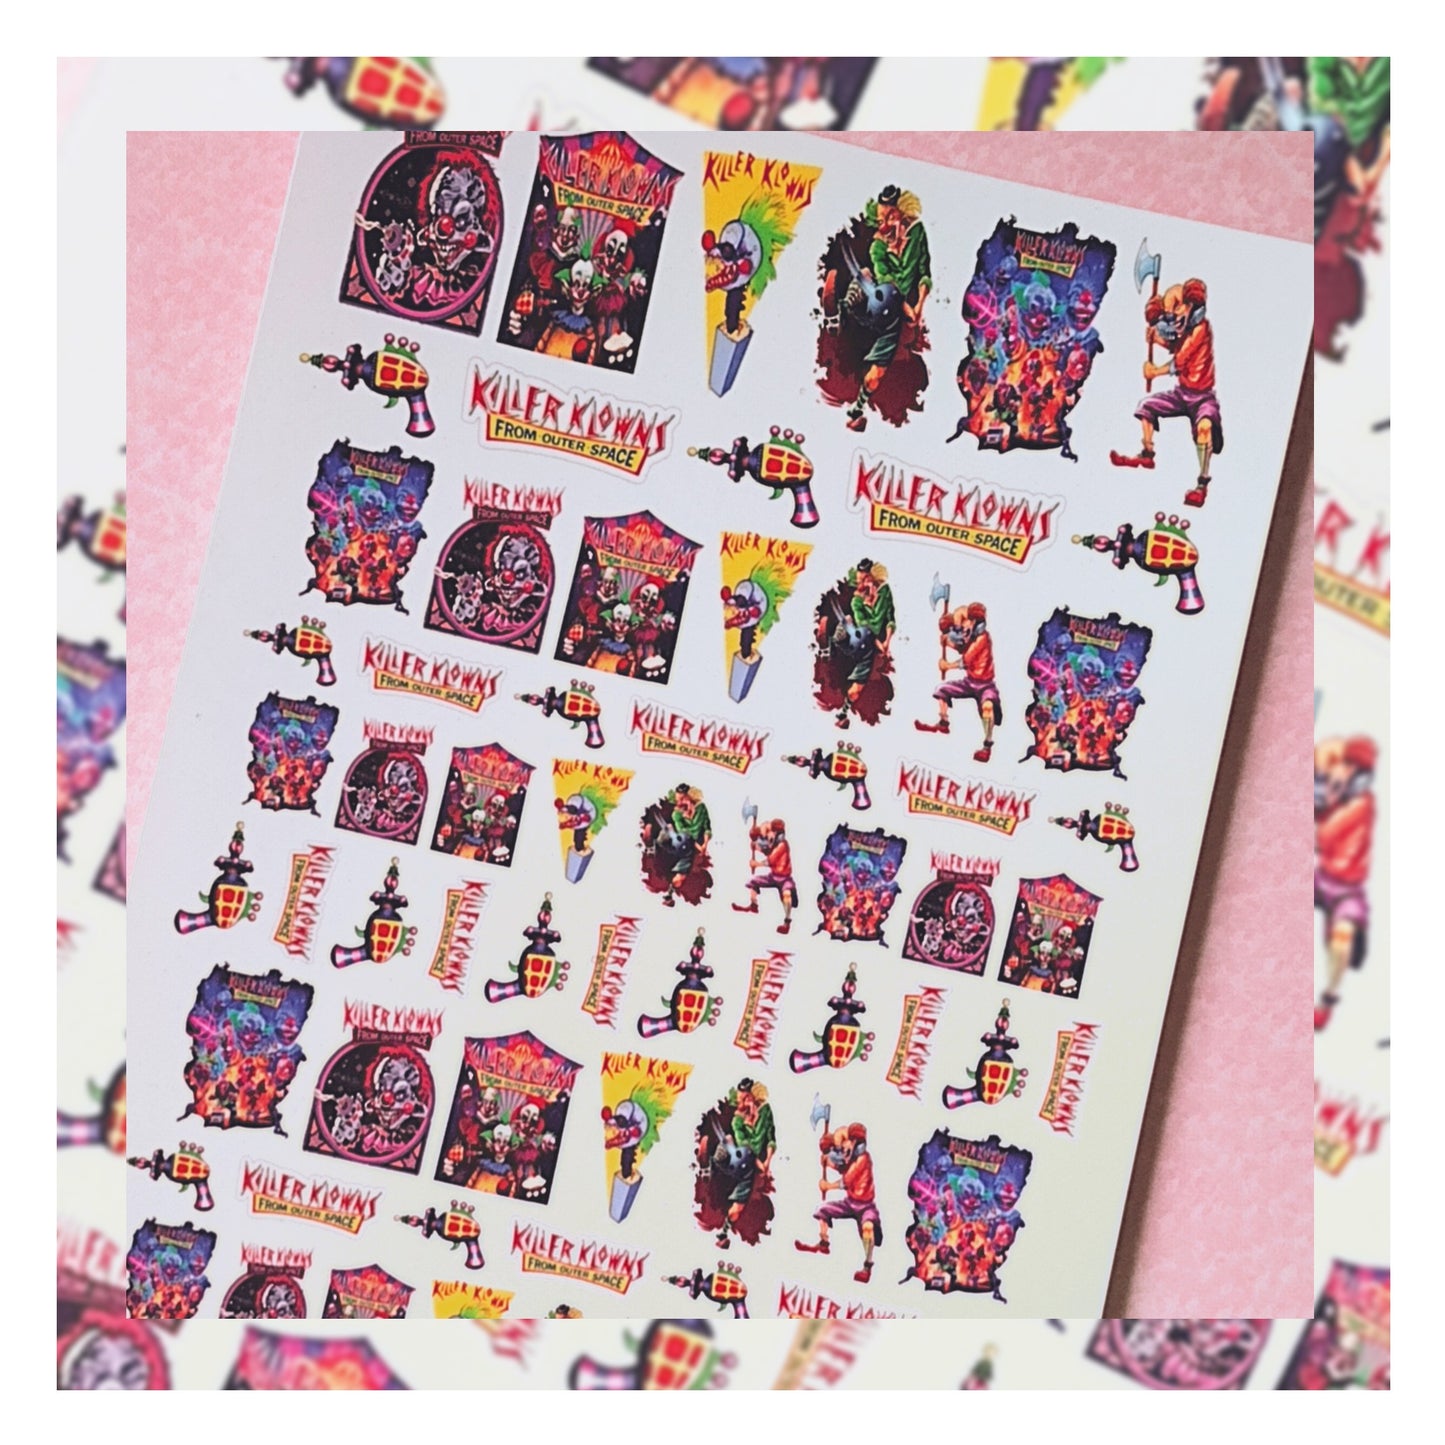 Nail Art- Killer Klowns From Outer Space -  Let's take a break!